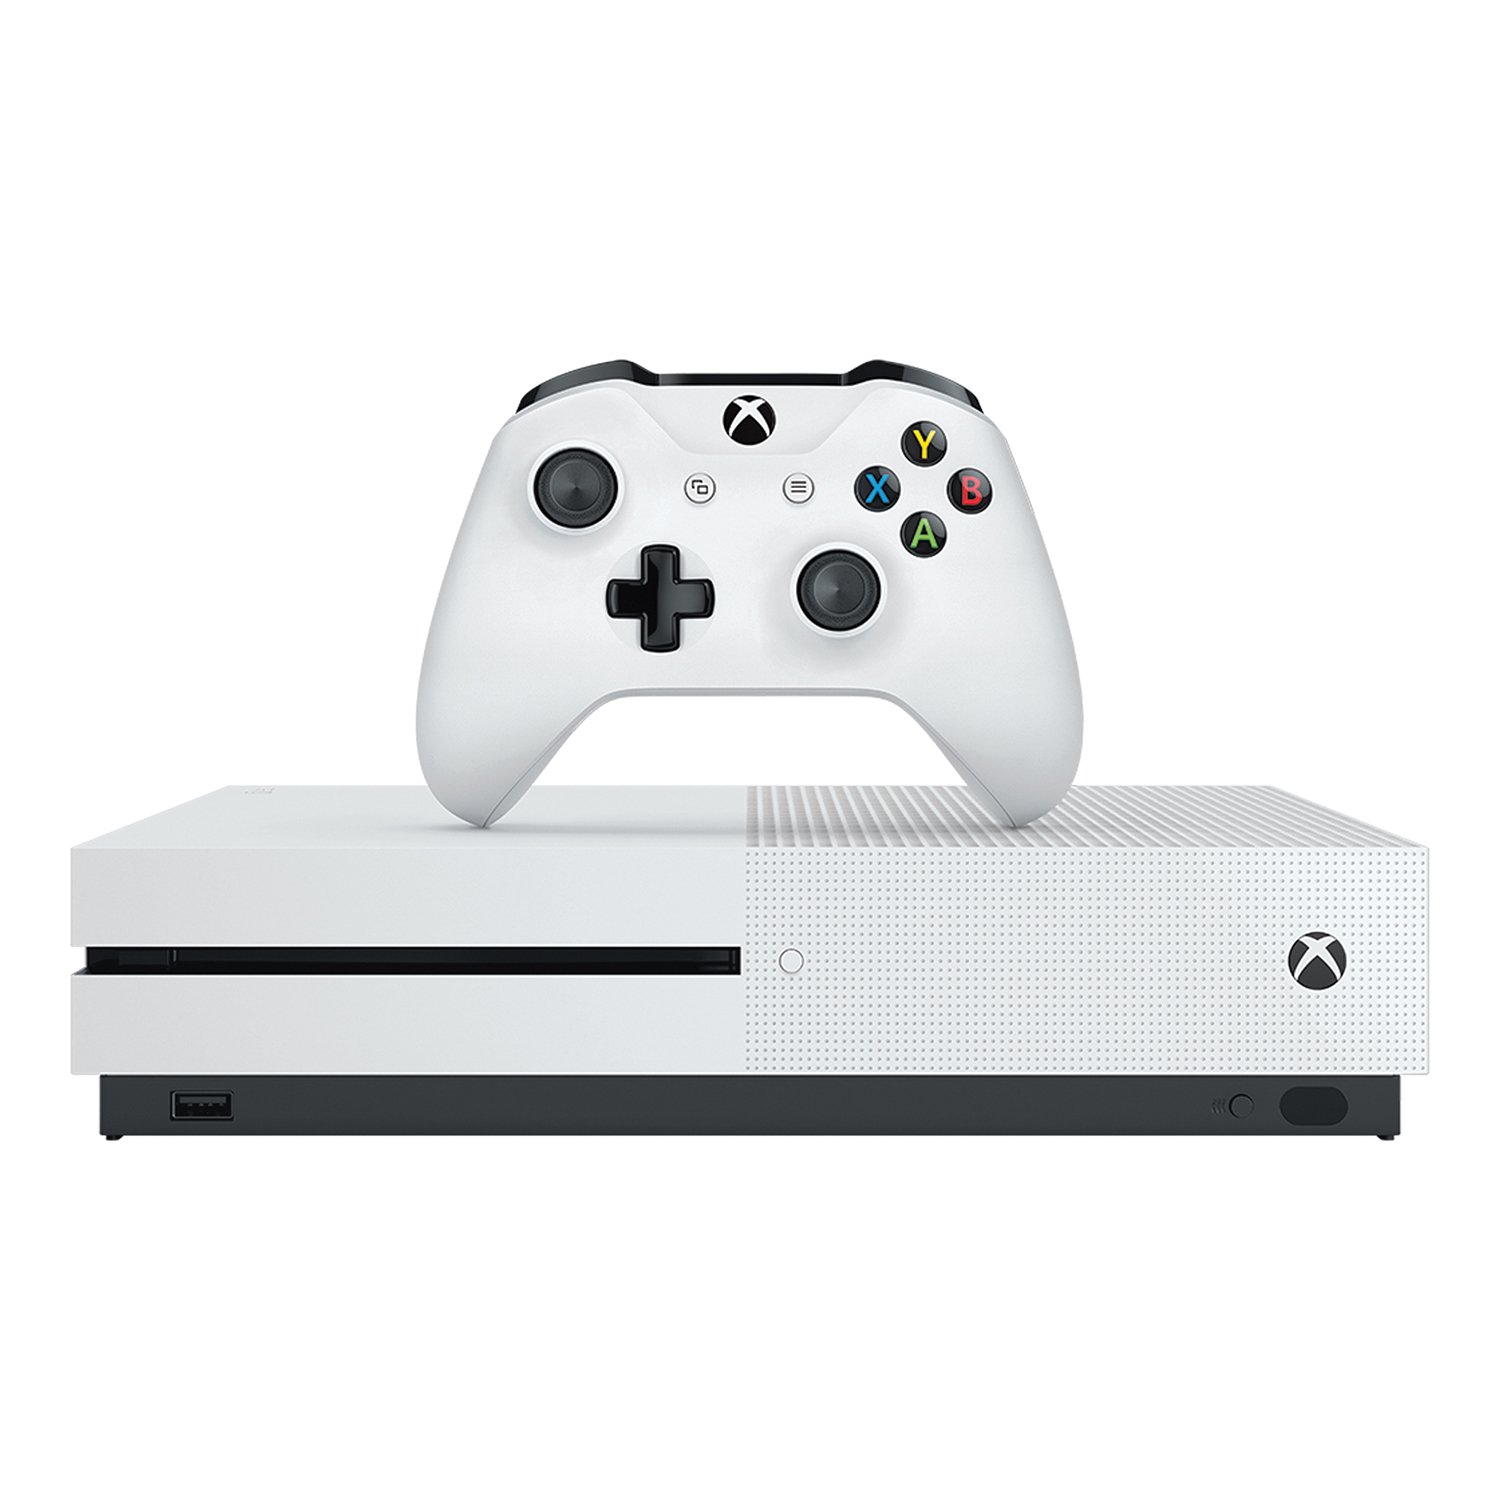 Xbox One X vs. Xbox One S: Side-by-side photo comparison - CNET